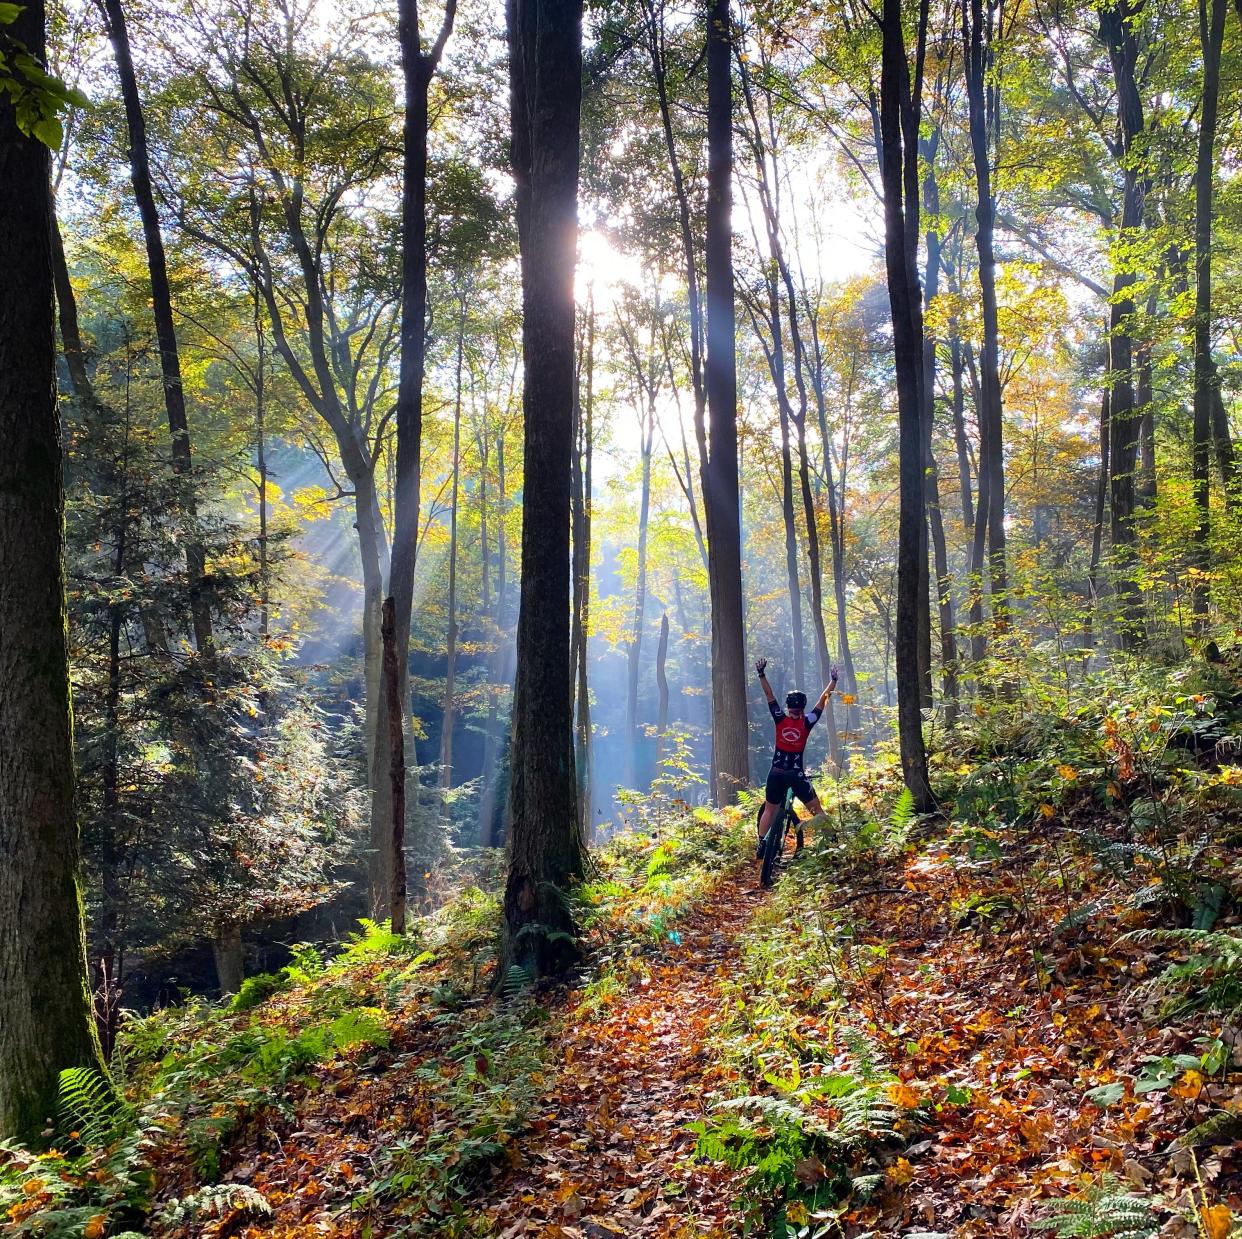 Ashley Hendershot of Ashland garnered first place in the Ohio State Parks photo contest for her photo taken at Mohican State Park.